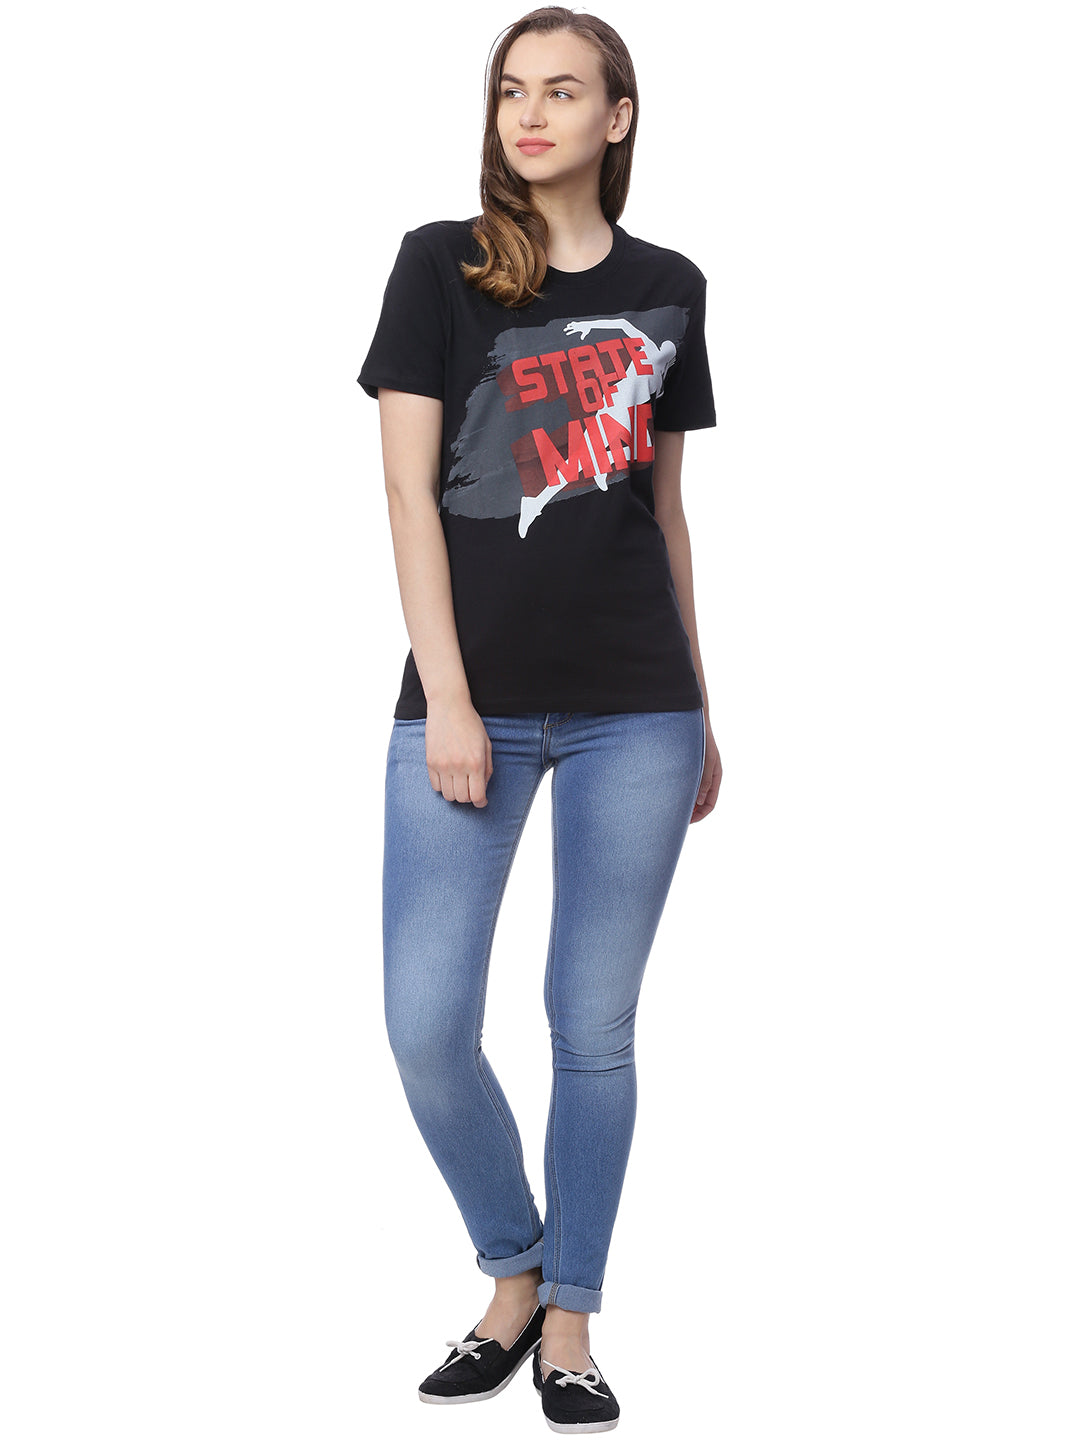 Wolfpack State Of Mind Black Printed Women T-Shirt